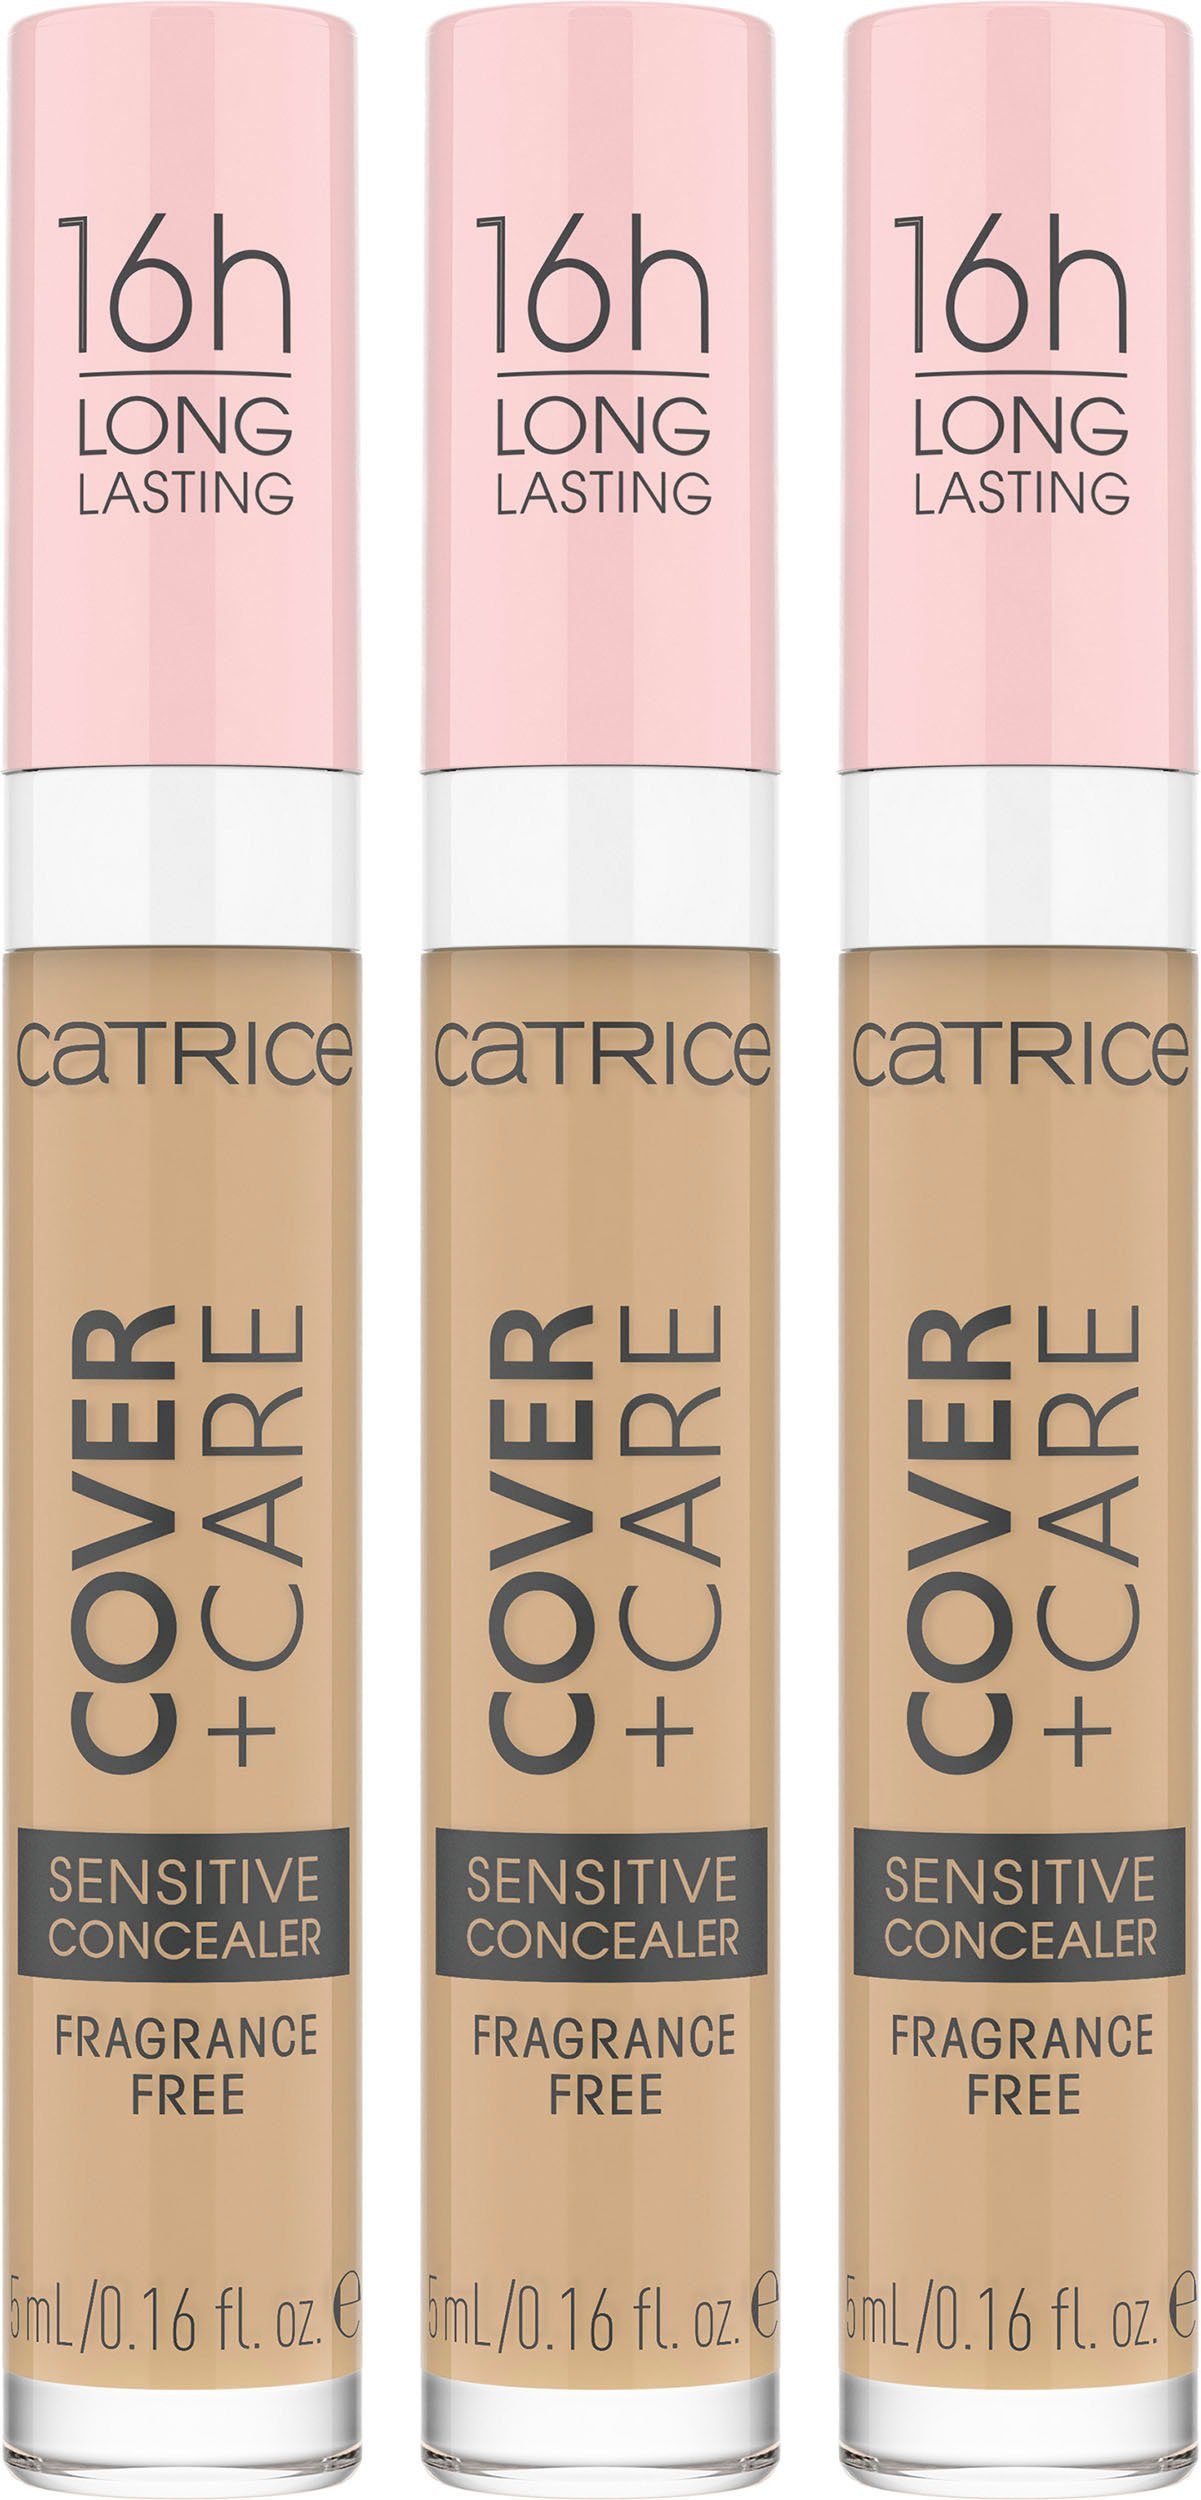 Catrice Concealer Catrice Cover + Care Sensitive Concealer, 3-tlg. 030N nude